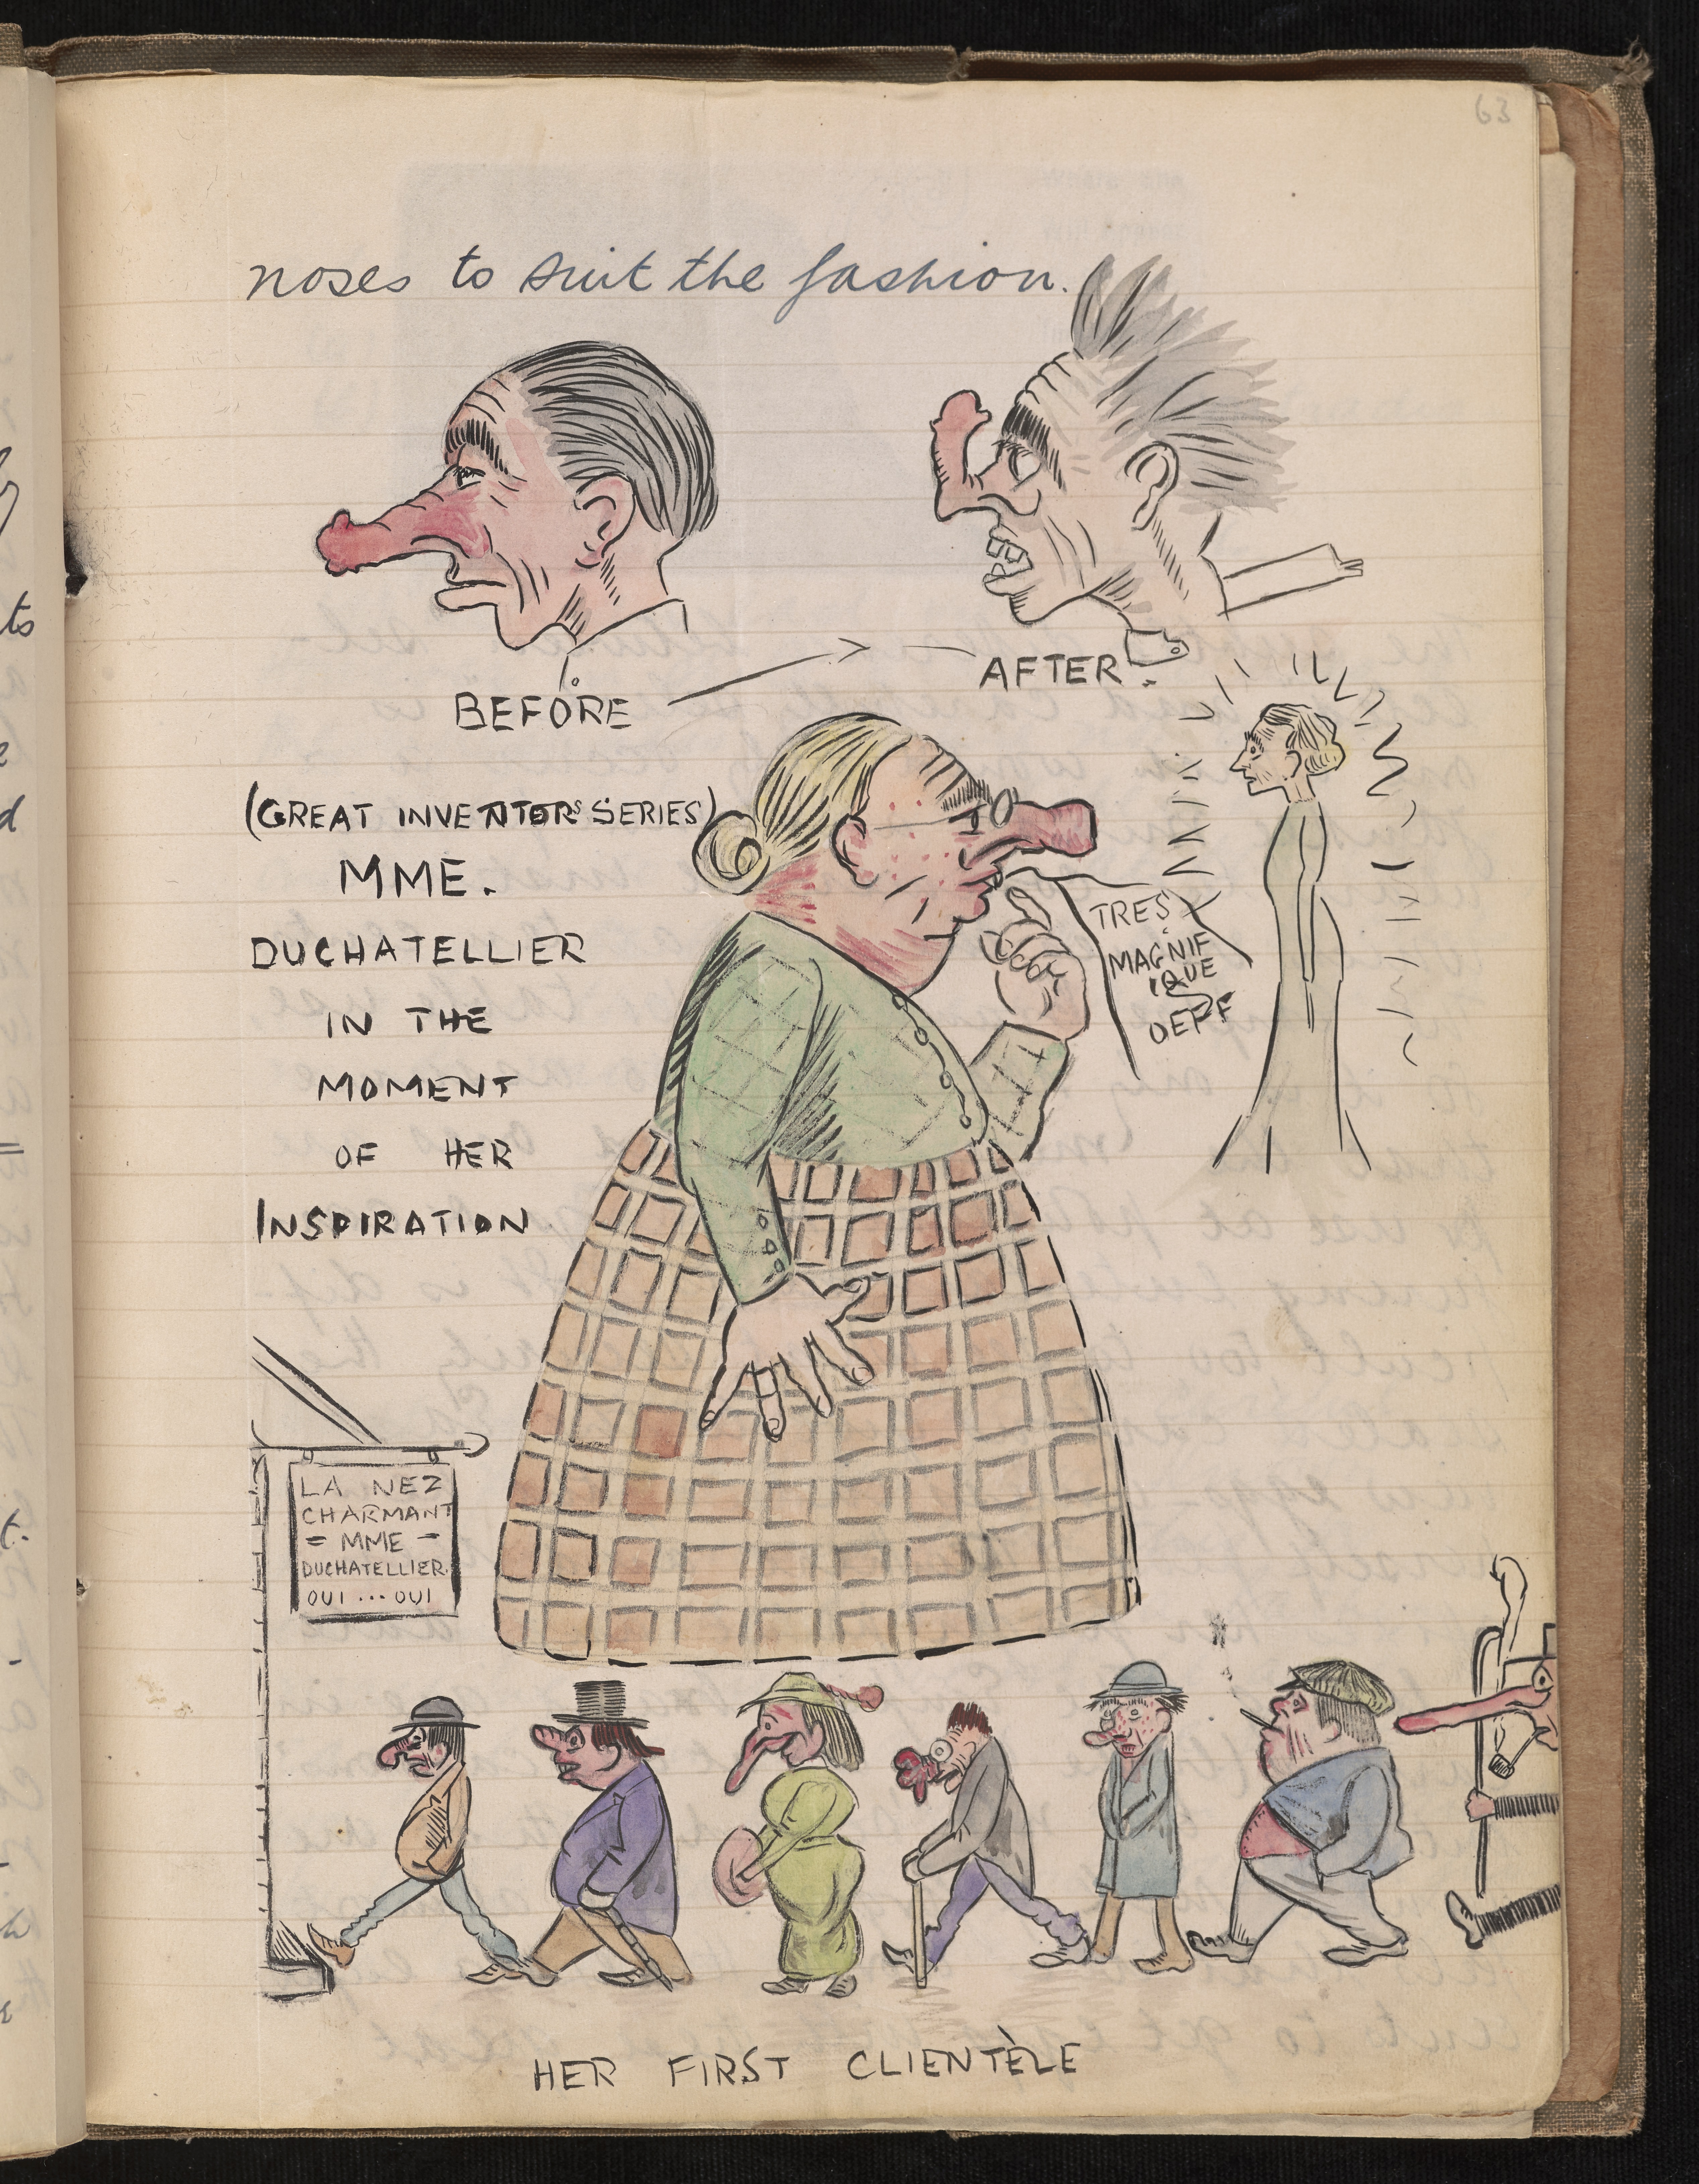 This humorous illustrated essay, poking fun at advertising rhetoric, is from the September/October 1918 issue, but unfortunately lacks an author attribution. The essay combines hand-written commentary, watercolor sketches, and clippings from newspapers.